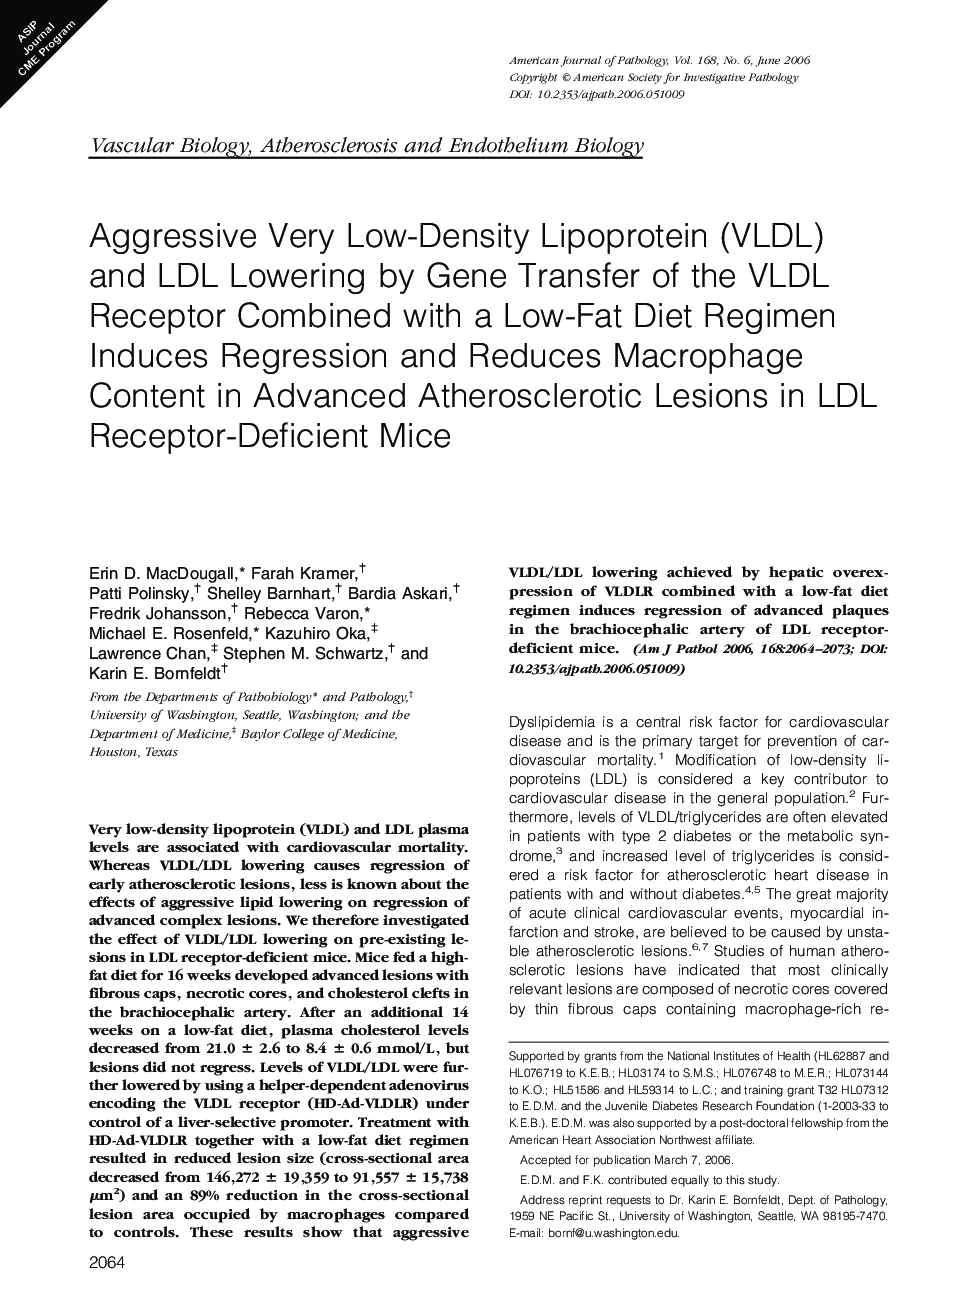 Aggressive Very Low-Density Lipoprotein (VLDL) and LDL Lowering by Gene Transfer of the VLDL Receptor Combined with a Low-Fat Diet Regimen Induces Regression and Reduces Macrophage Content in Advanced Atherosclerotic Lesions in LDL Receptor-Deficient Mice